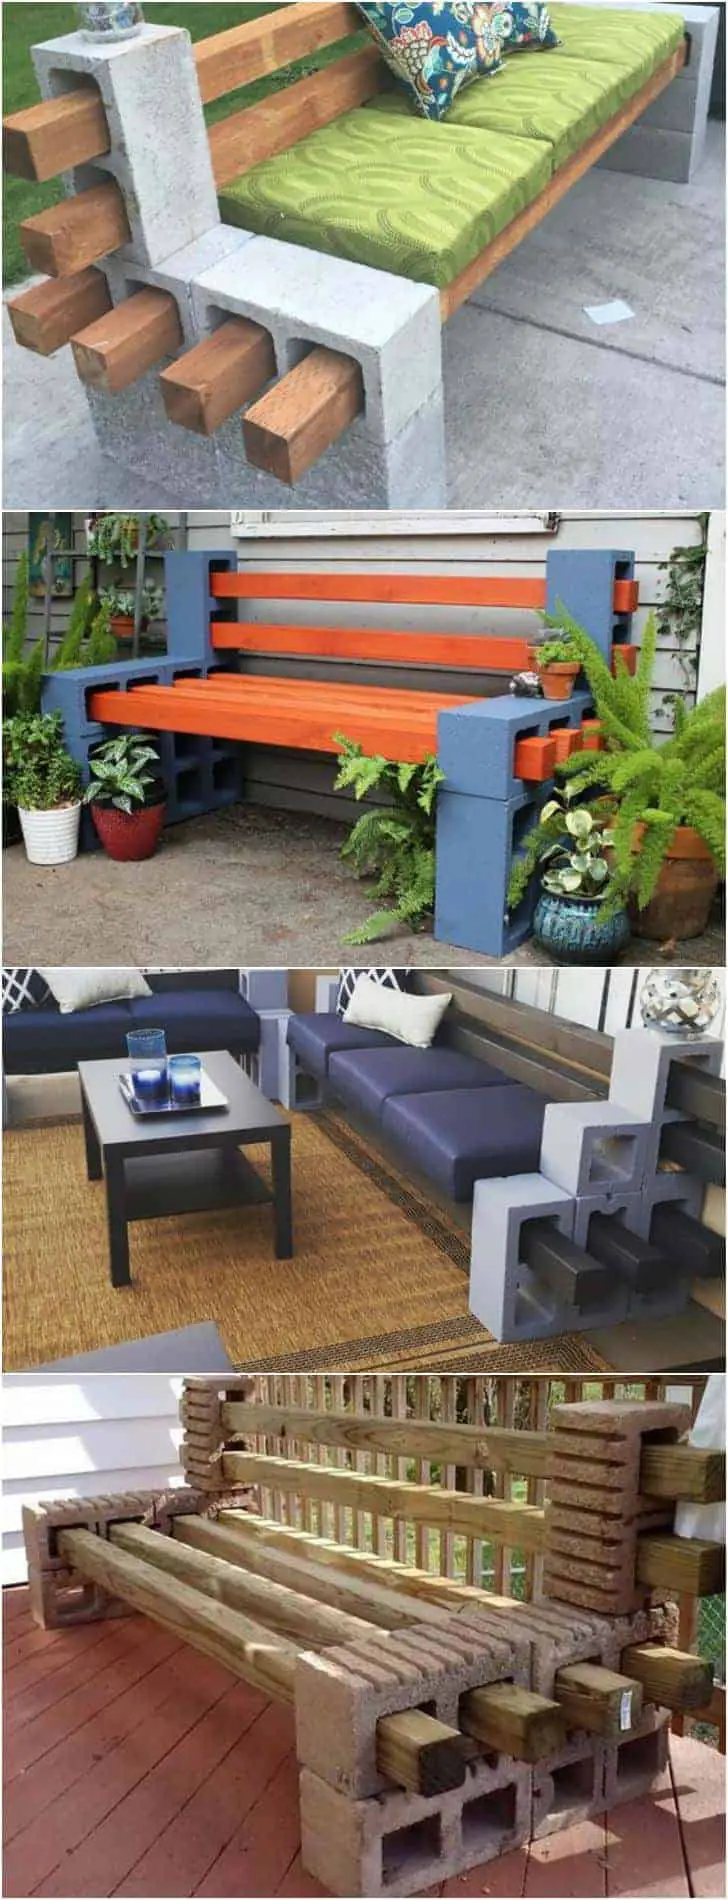 How to Make a Cinder Block Bench: 10 Amazing Ideas to Inspire You!